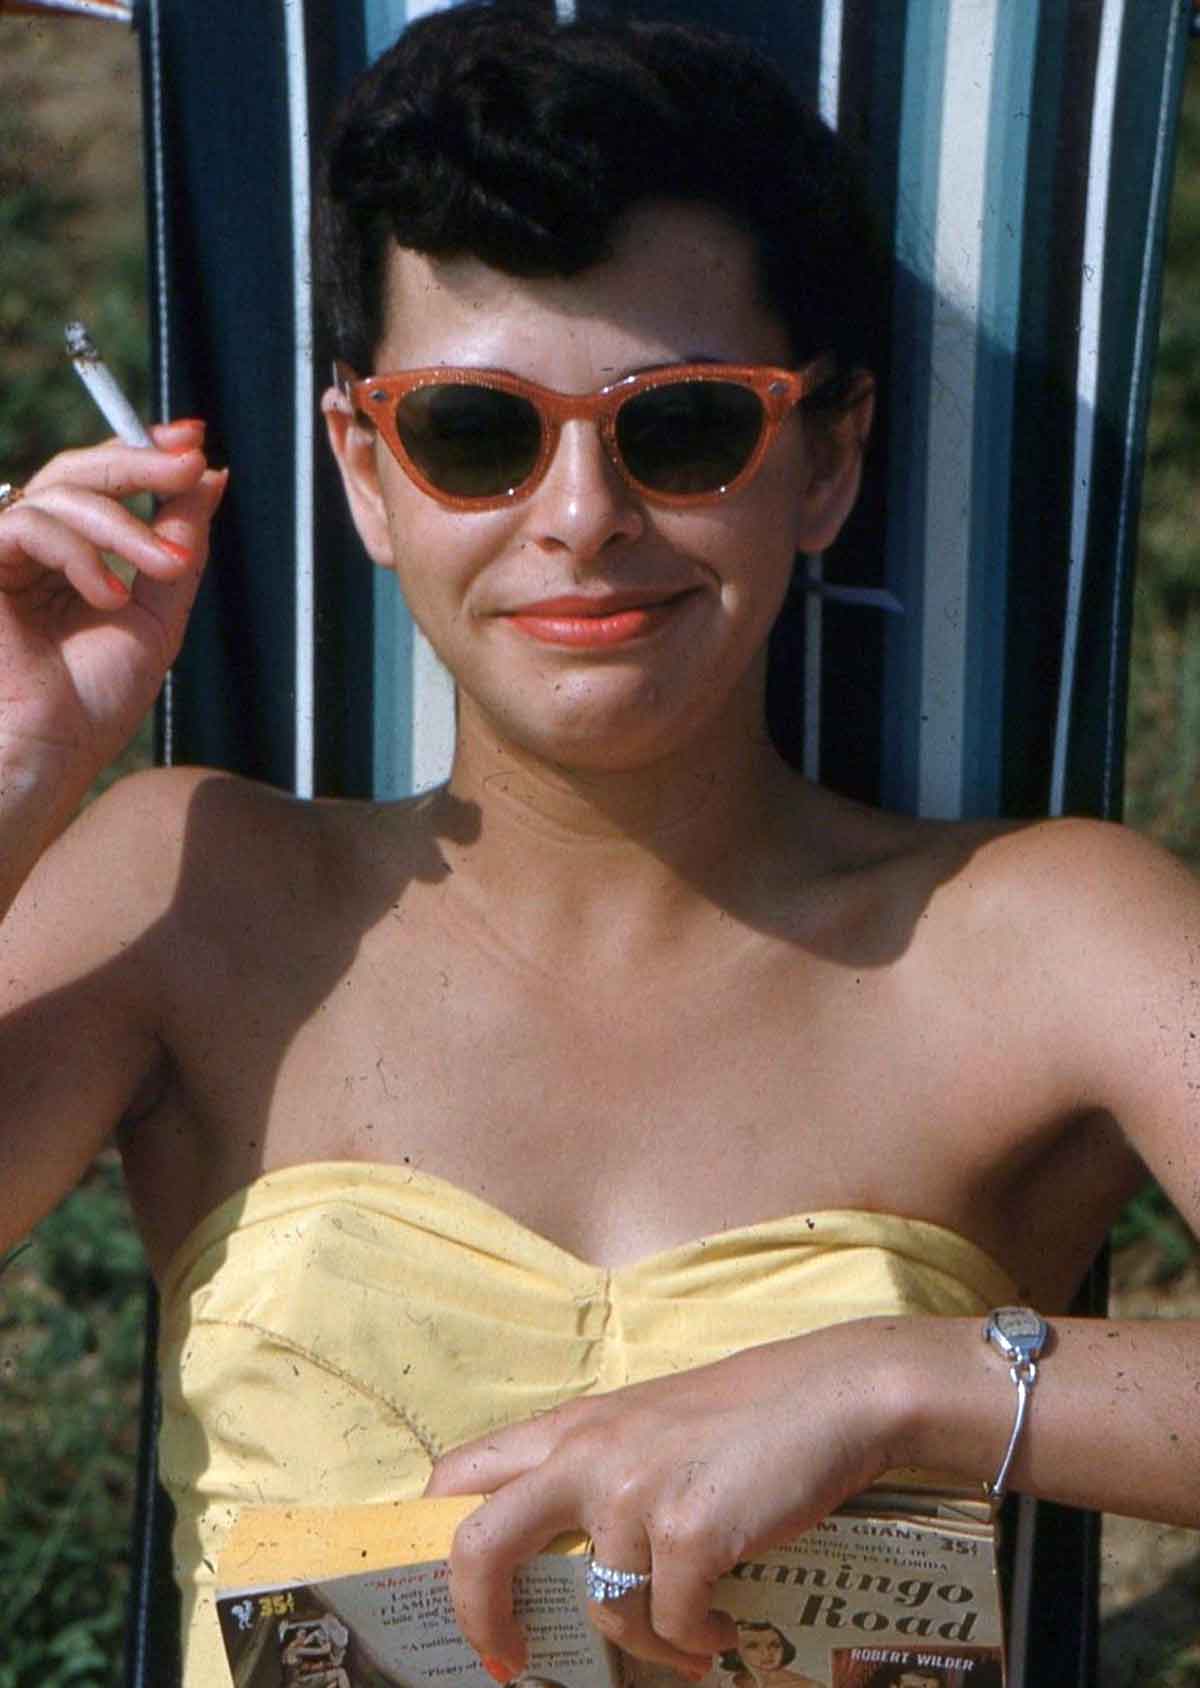 photos of Women in the 1950s - found photos of women in the 1950s